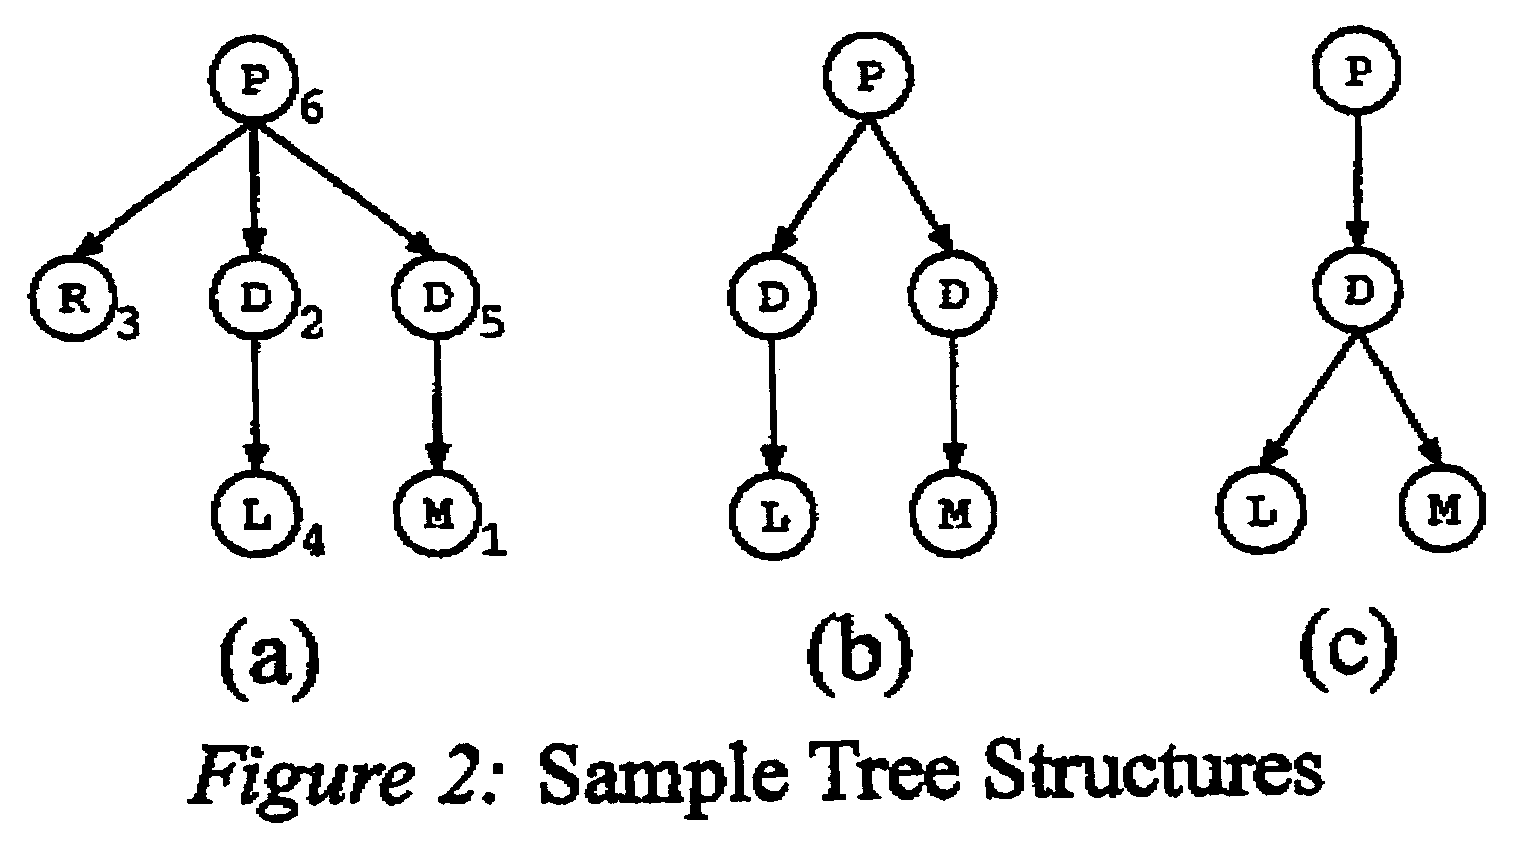 System and method for tree structure indexing that provides at least one constraint sequence to preserve query-equivalence between xml document structure match and subsequence match